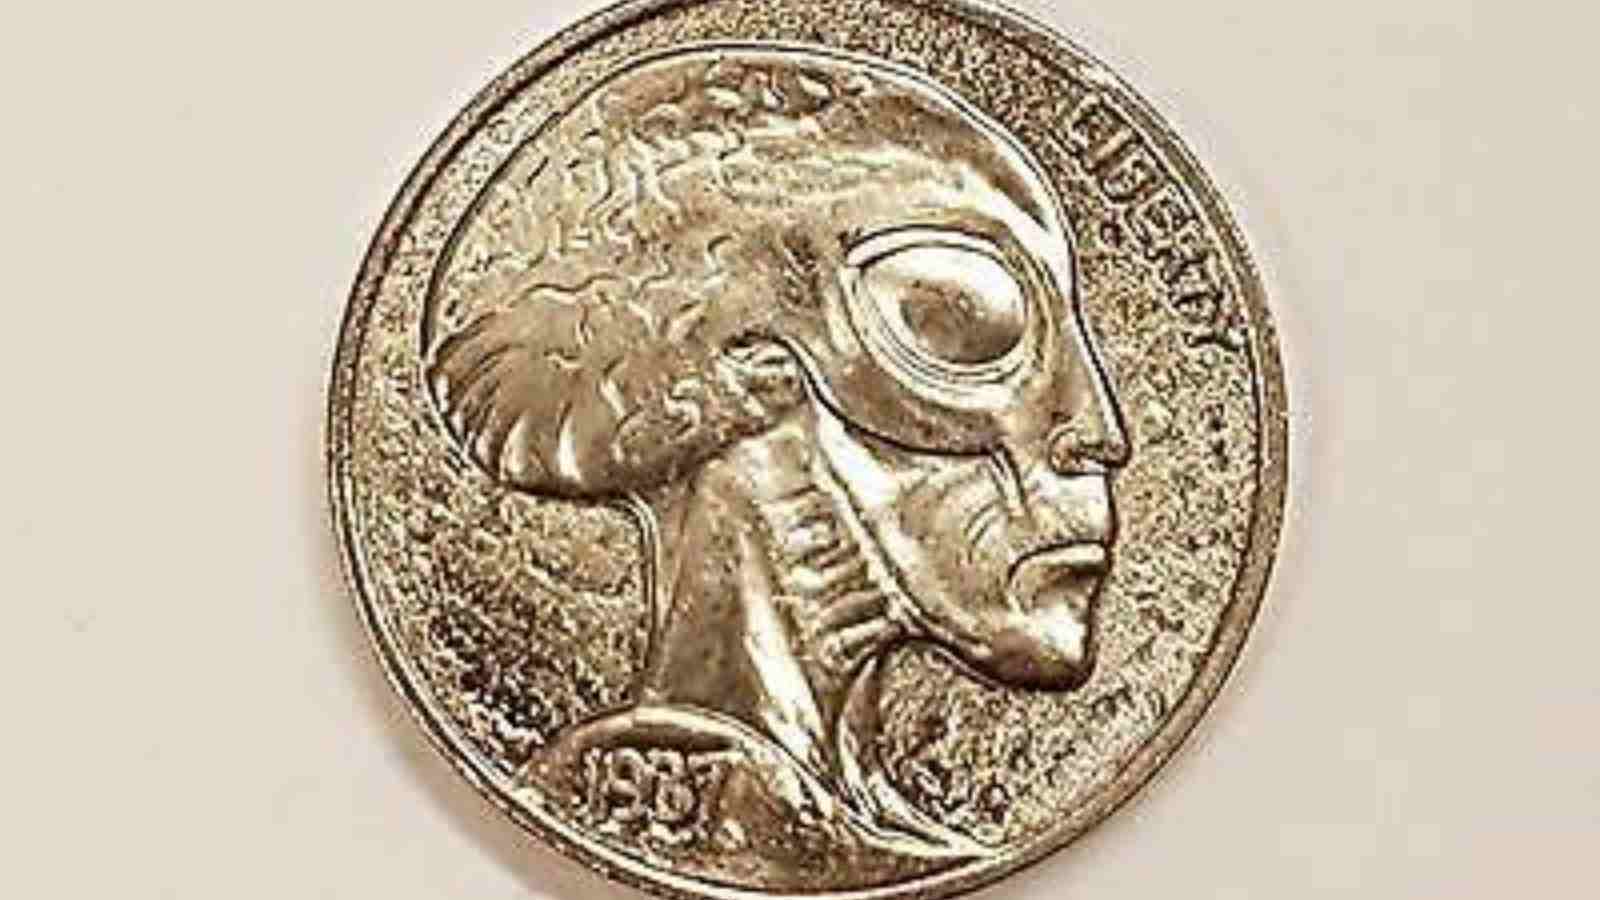 The "extraterrestrial" coin